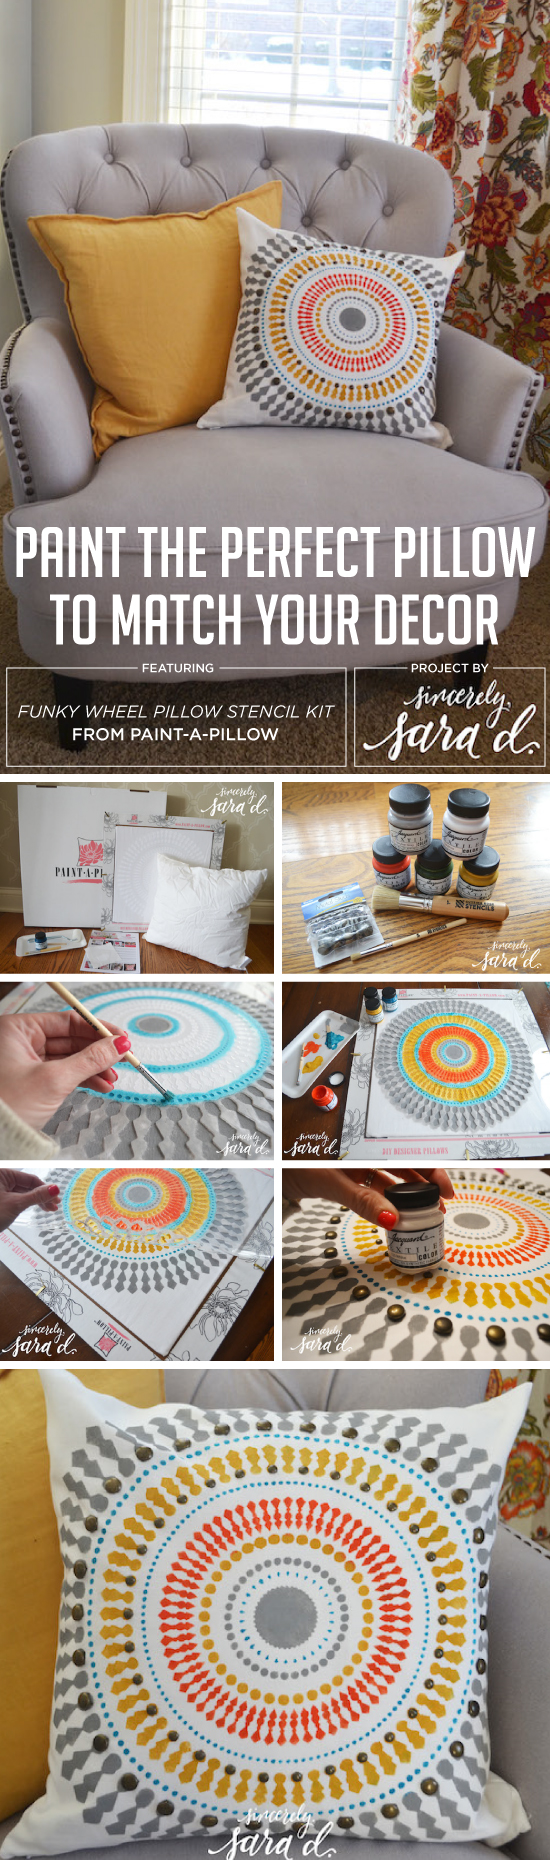 Cutting Edge Stencils shares how to easily create DIY accent pillows using the Funky Wheel Paint-A-Pillow kit. http://paintapillow.com/index.php/funky-wheel-paint-a-pillow-kit.html